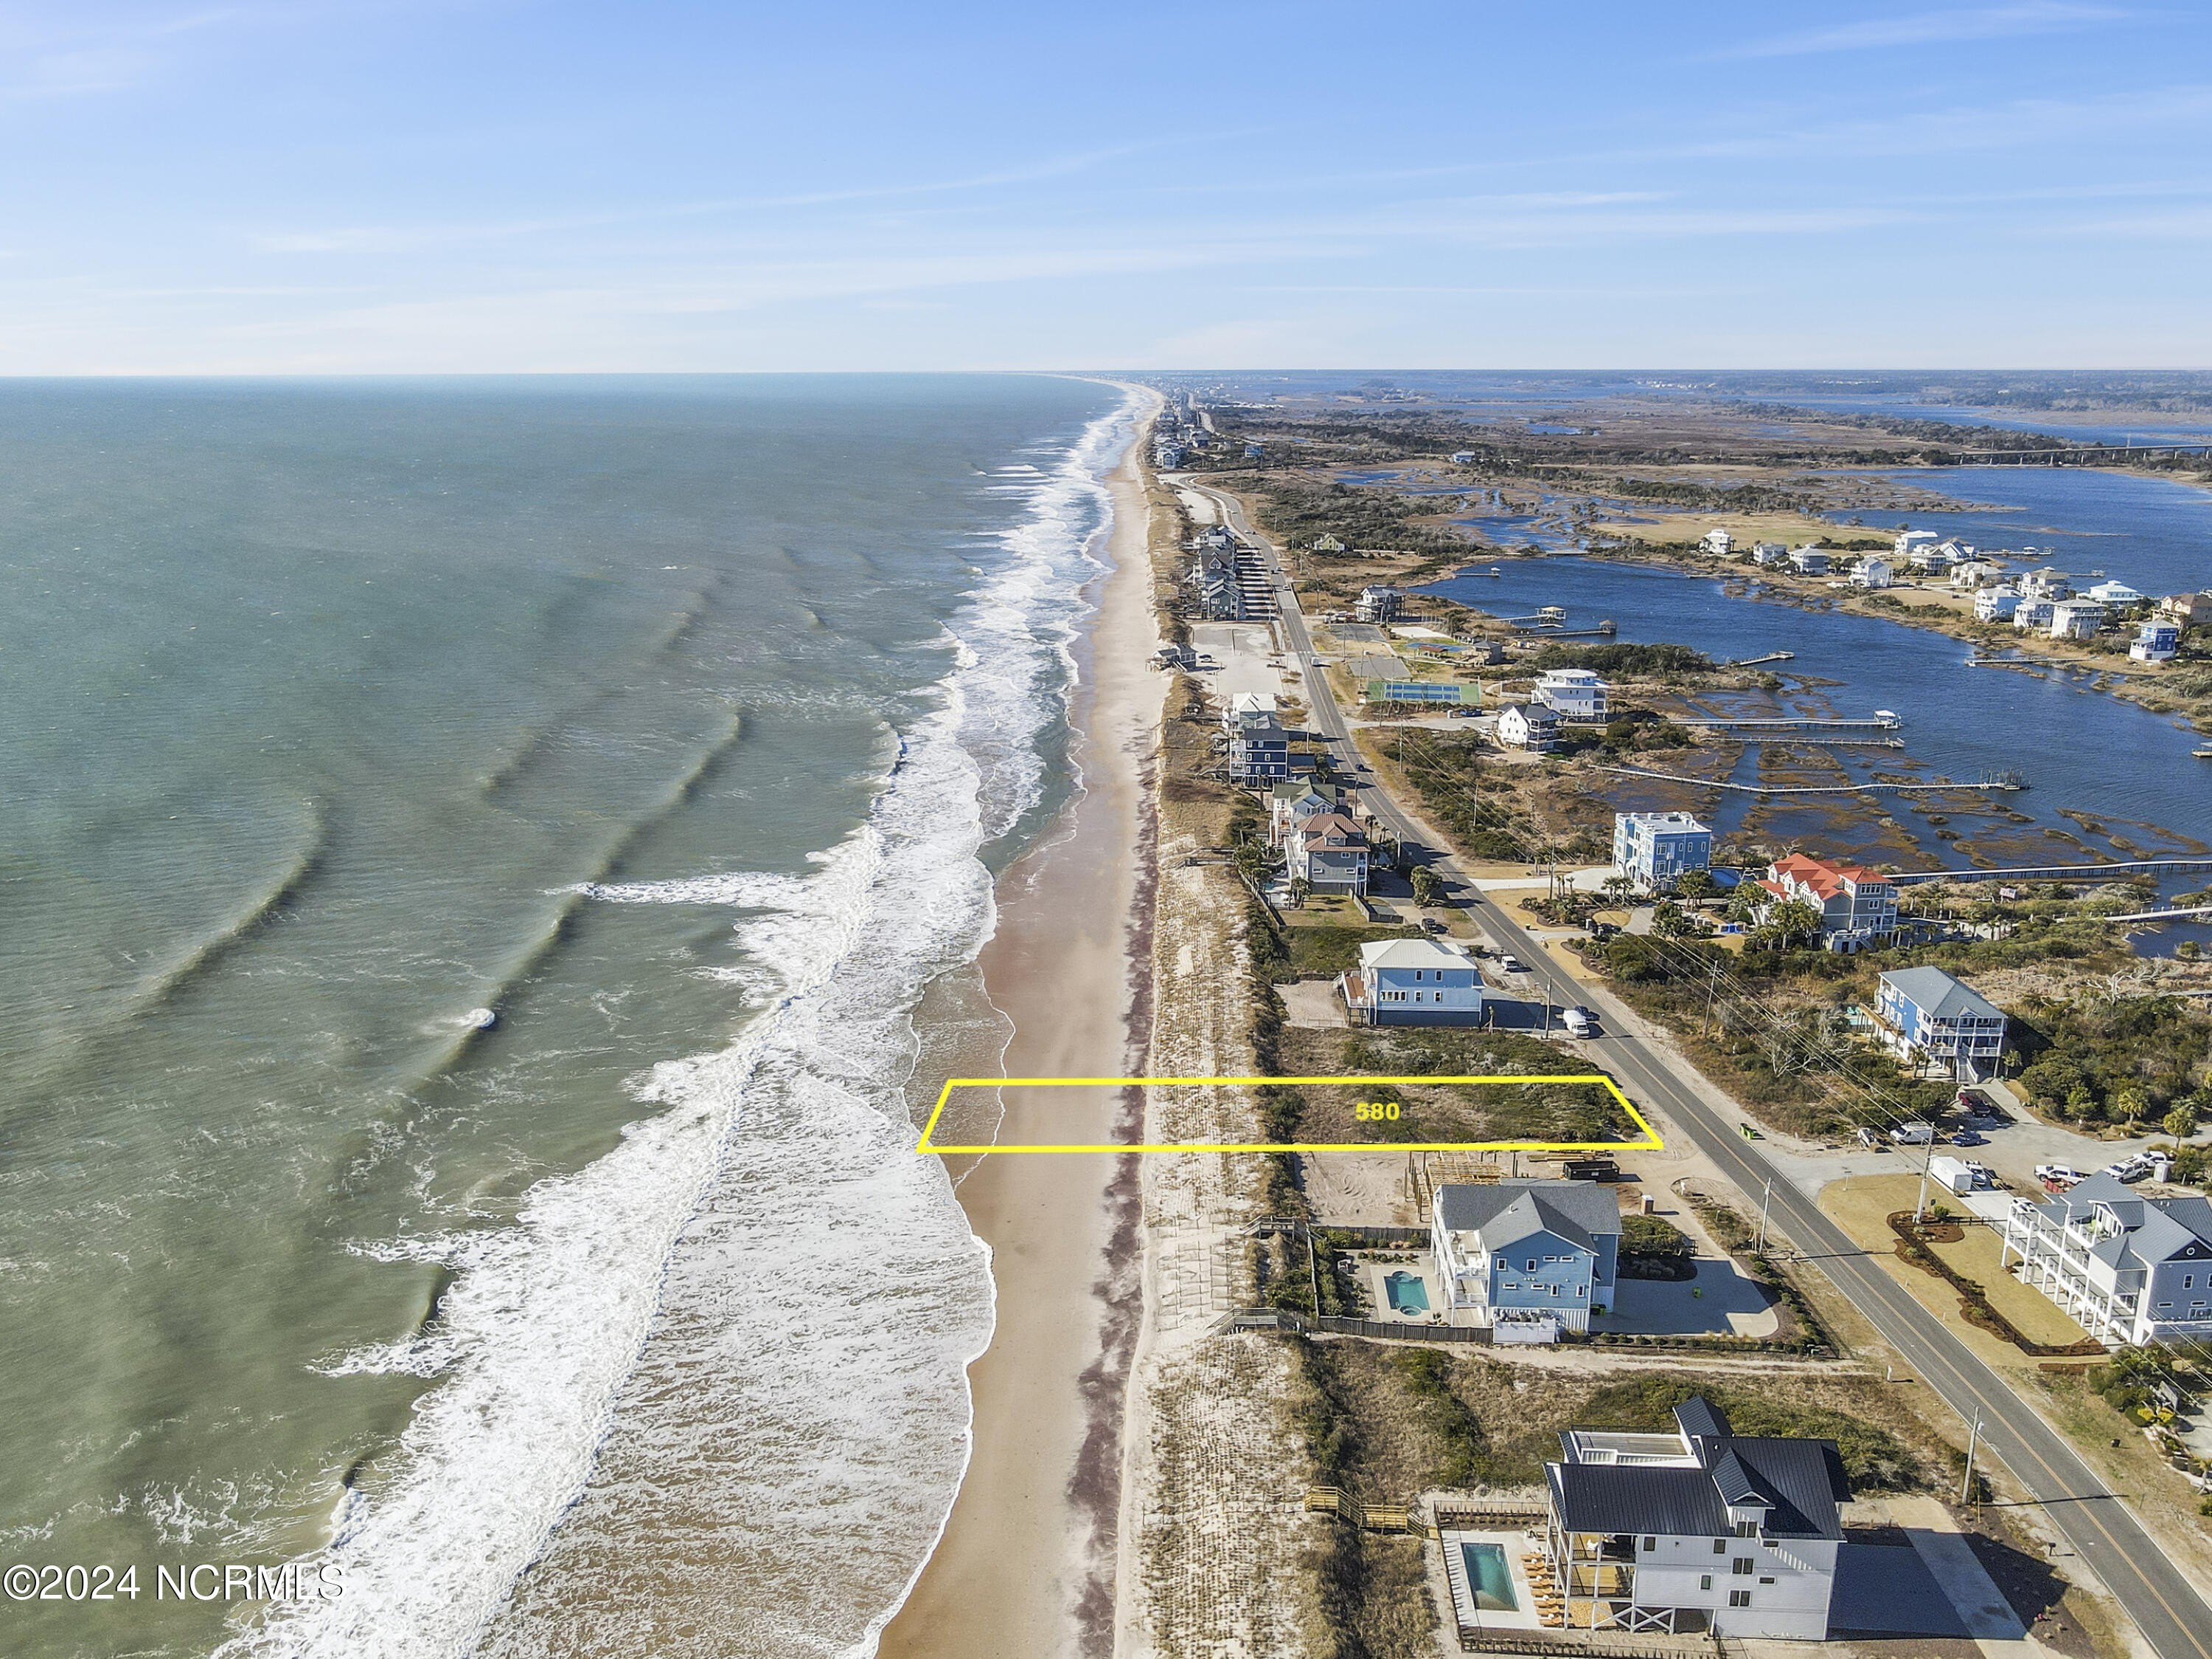 1. 580 New River Inlet Road